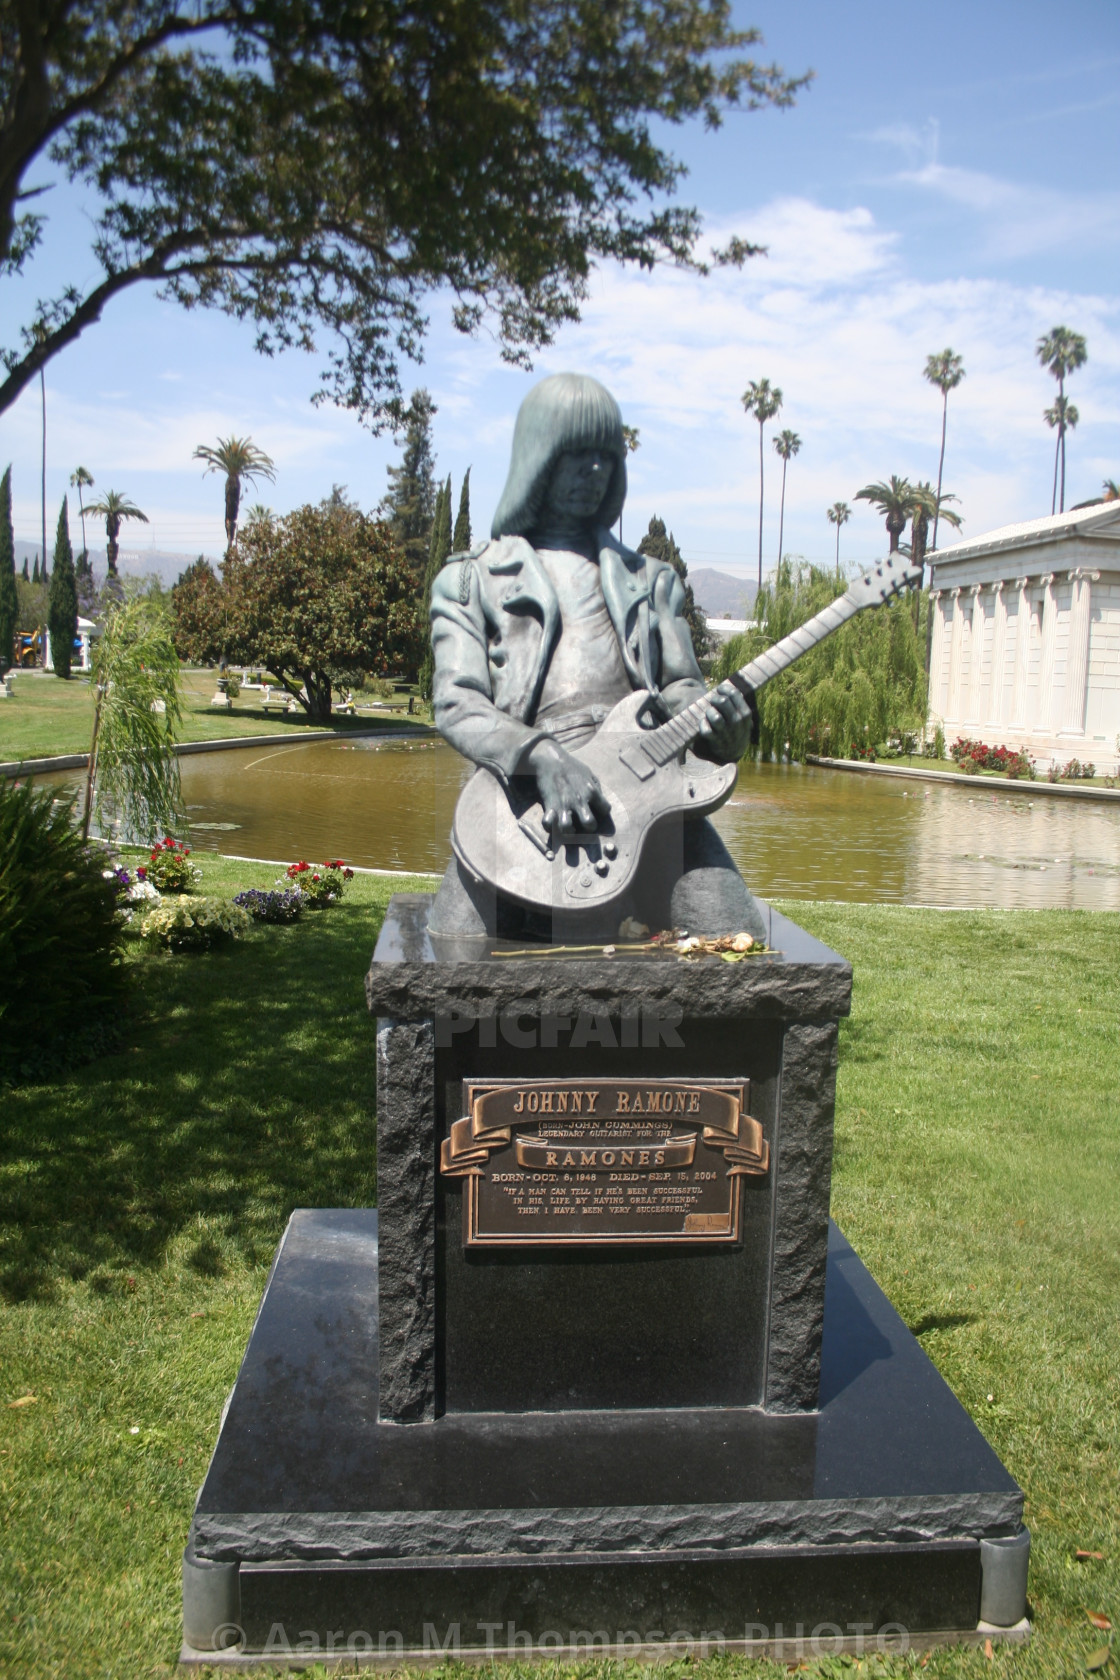 "Close up of Joey Ramone's Grave" stock image